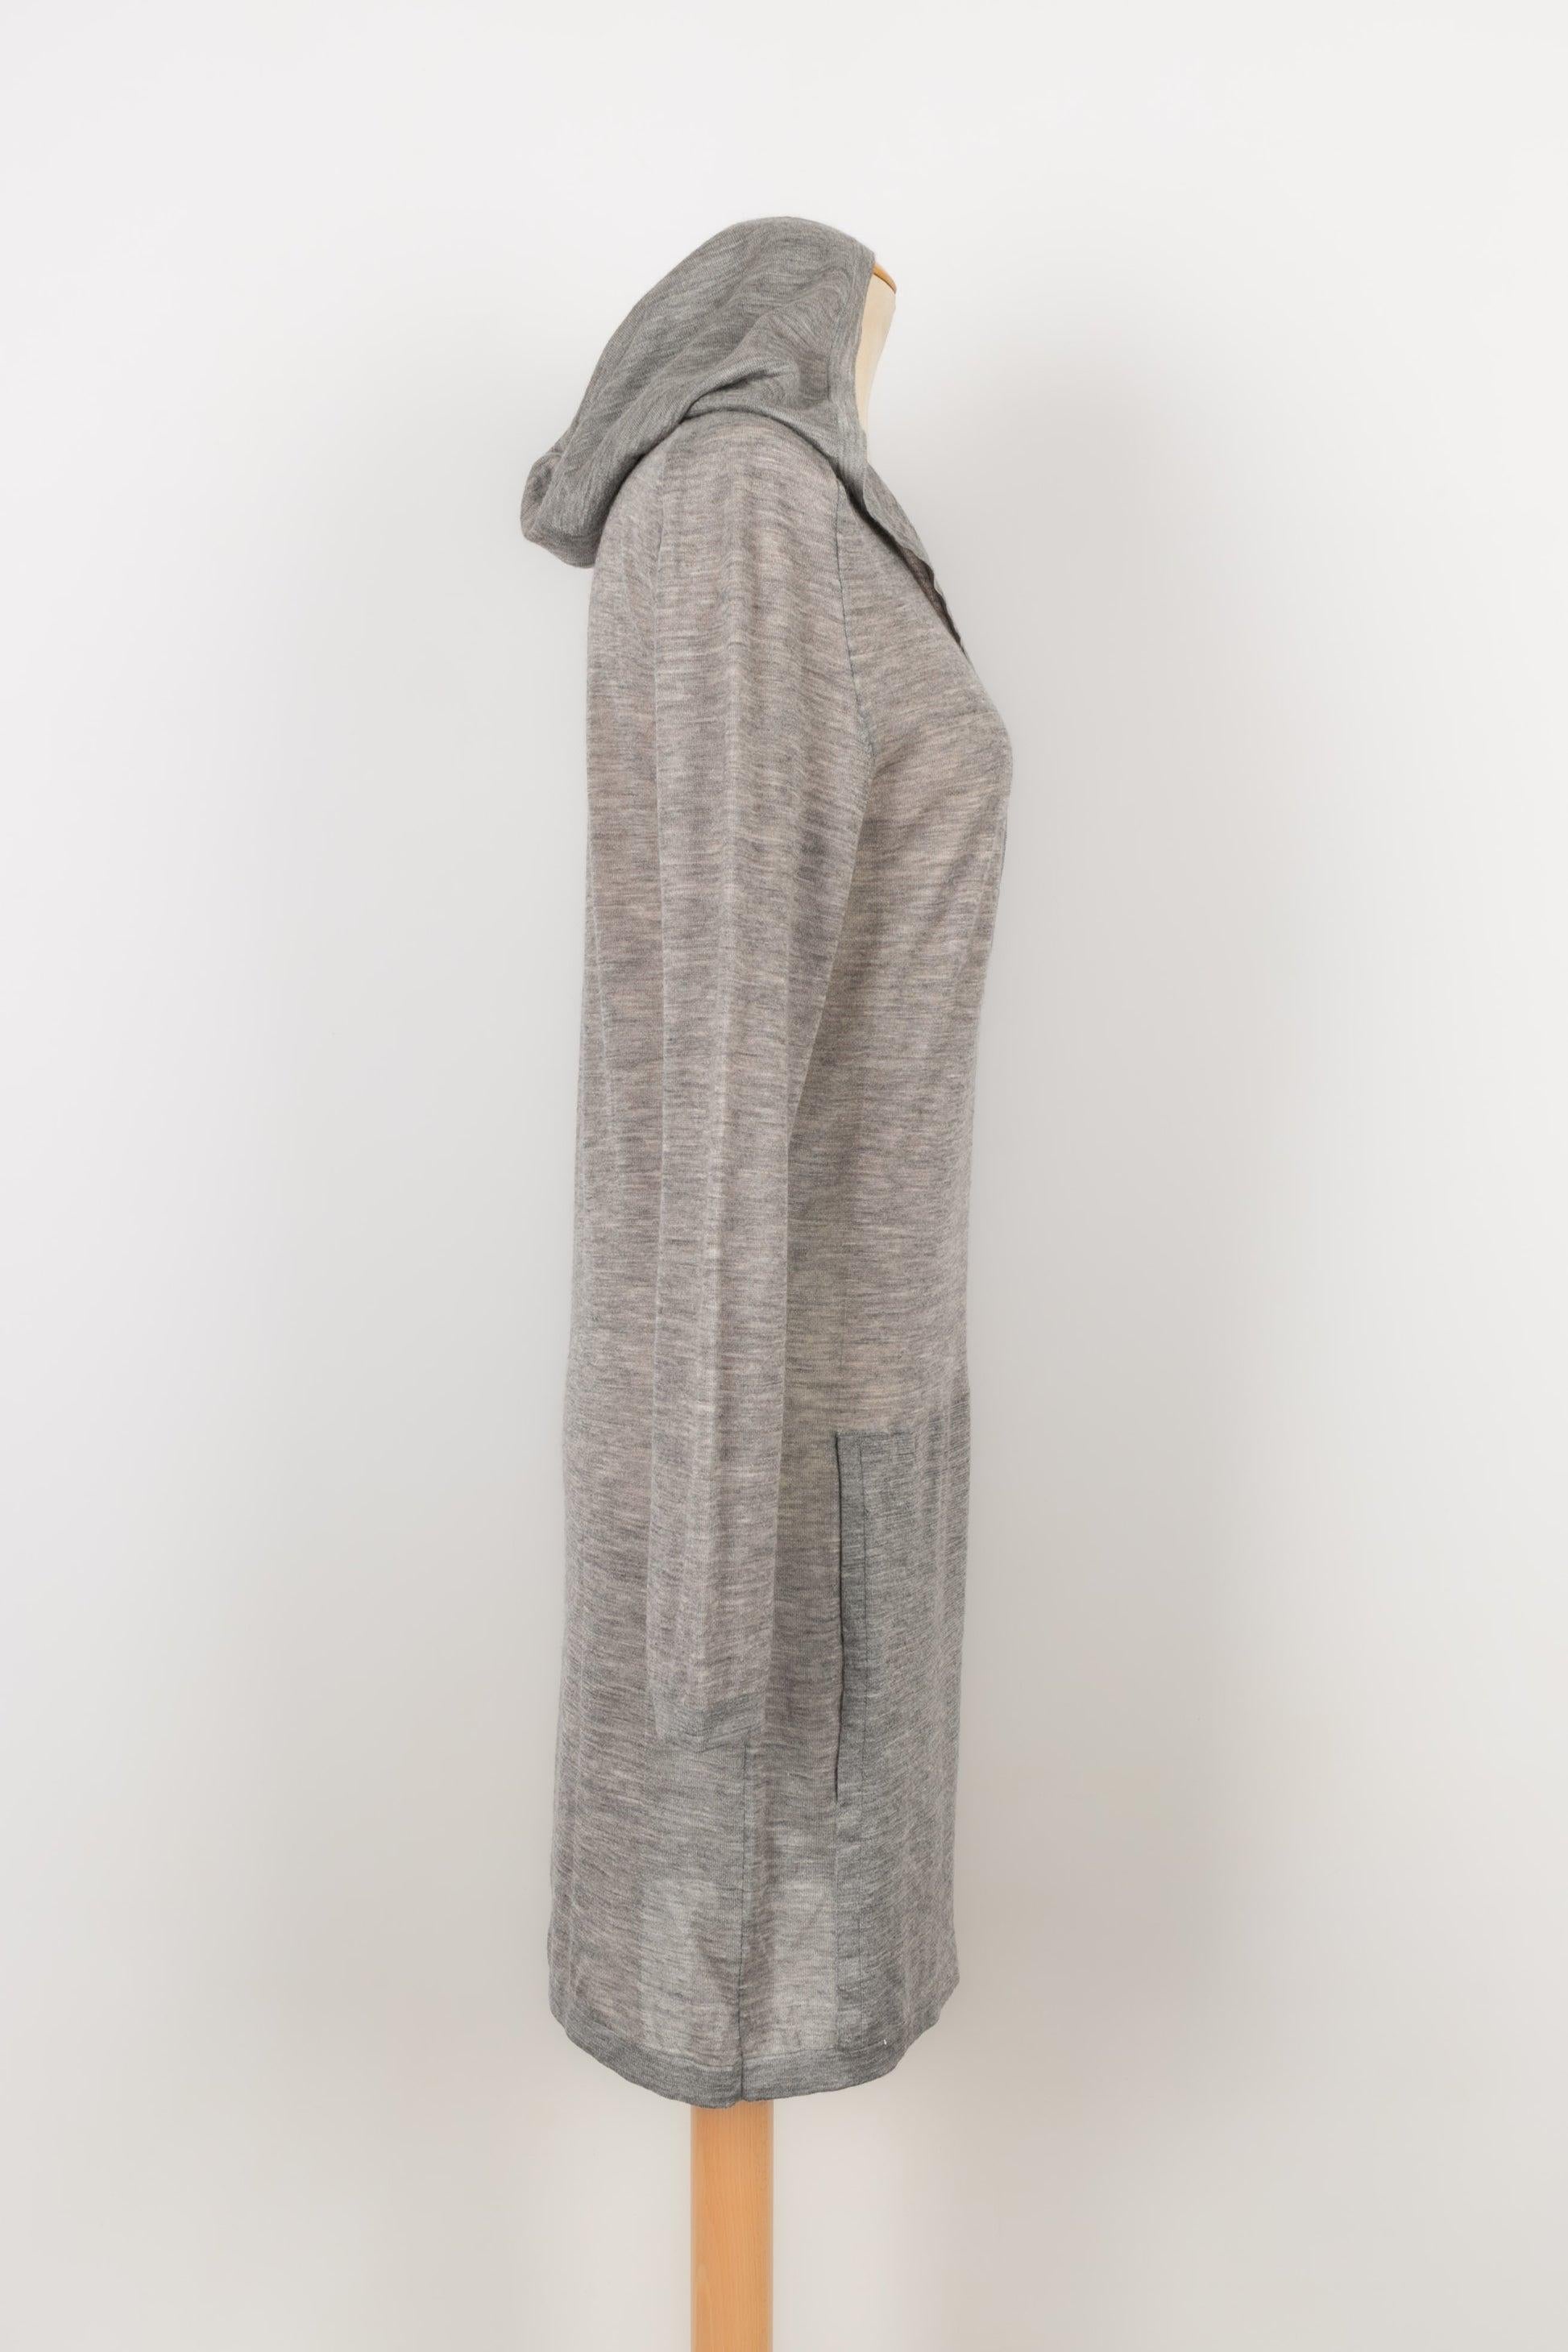 Chanel - Grey cashmere hooded pullover dress. No size indicated, it fits a 44FR.

Additional information:
Condition: Very good condition
Dimensions: Shoulder width: 50 cm - Chest: 50 cm - Sleeve length: 60 cm - Length: 90 cm

Seller Reference: VR177
